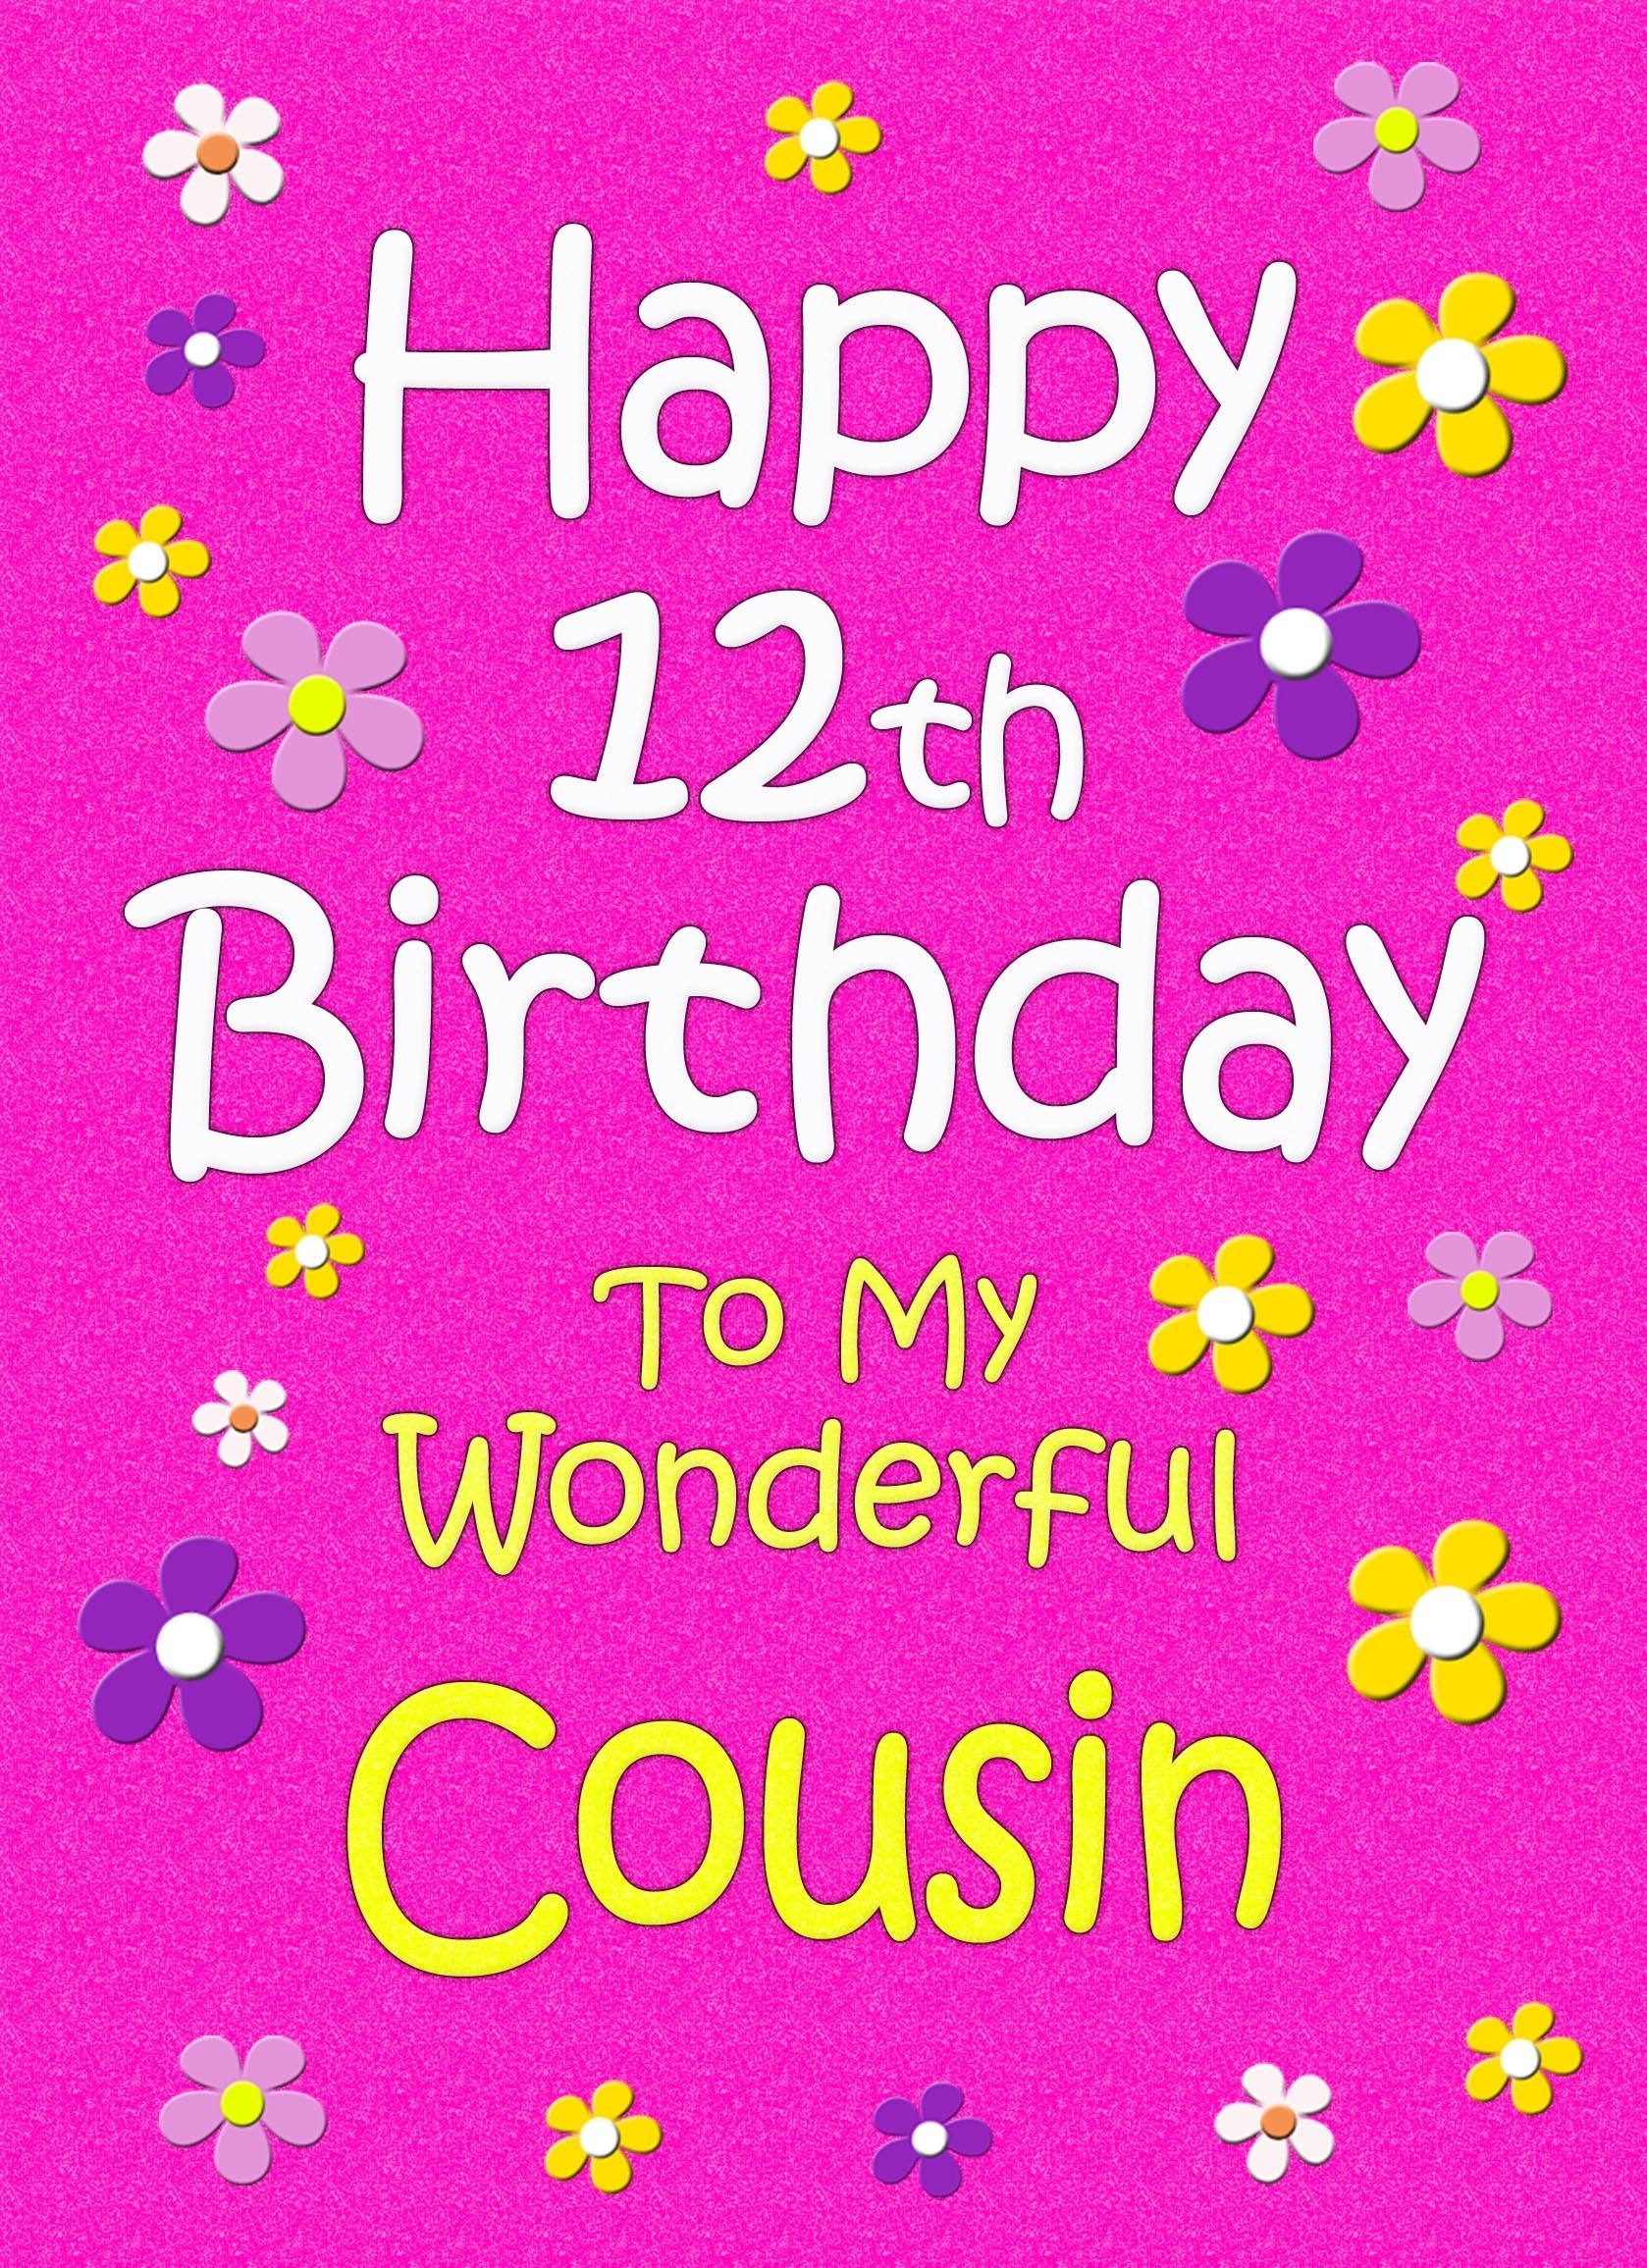 Cousin 12th Birthday Card (Pink)